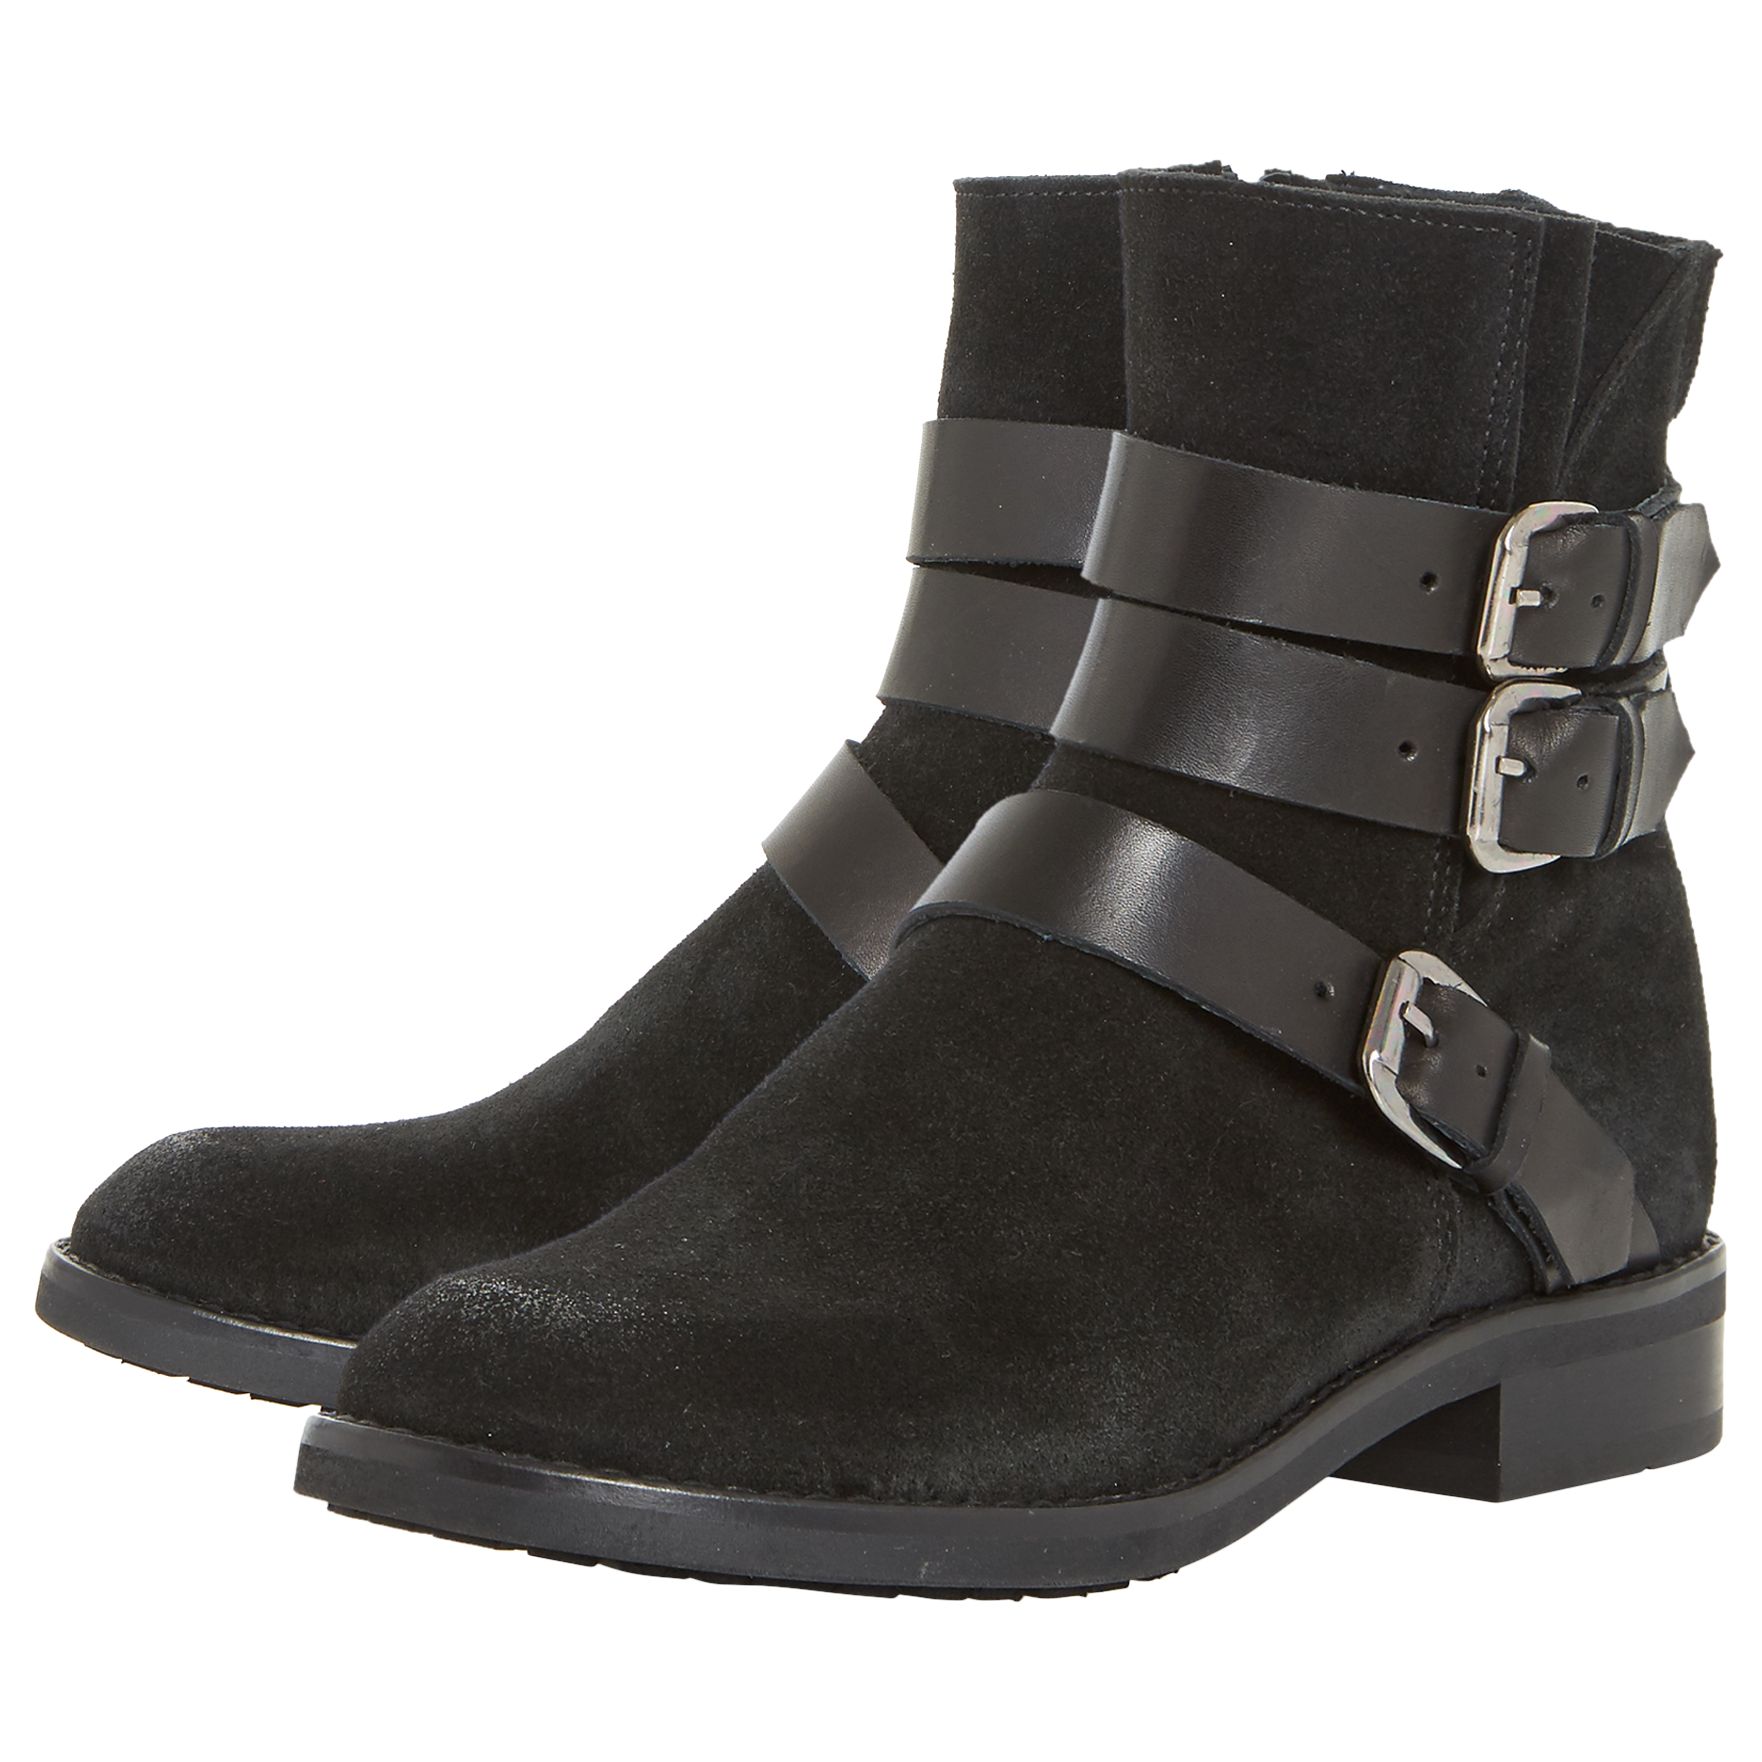 Buckle Ankle Boots, Black at John Lewis 